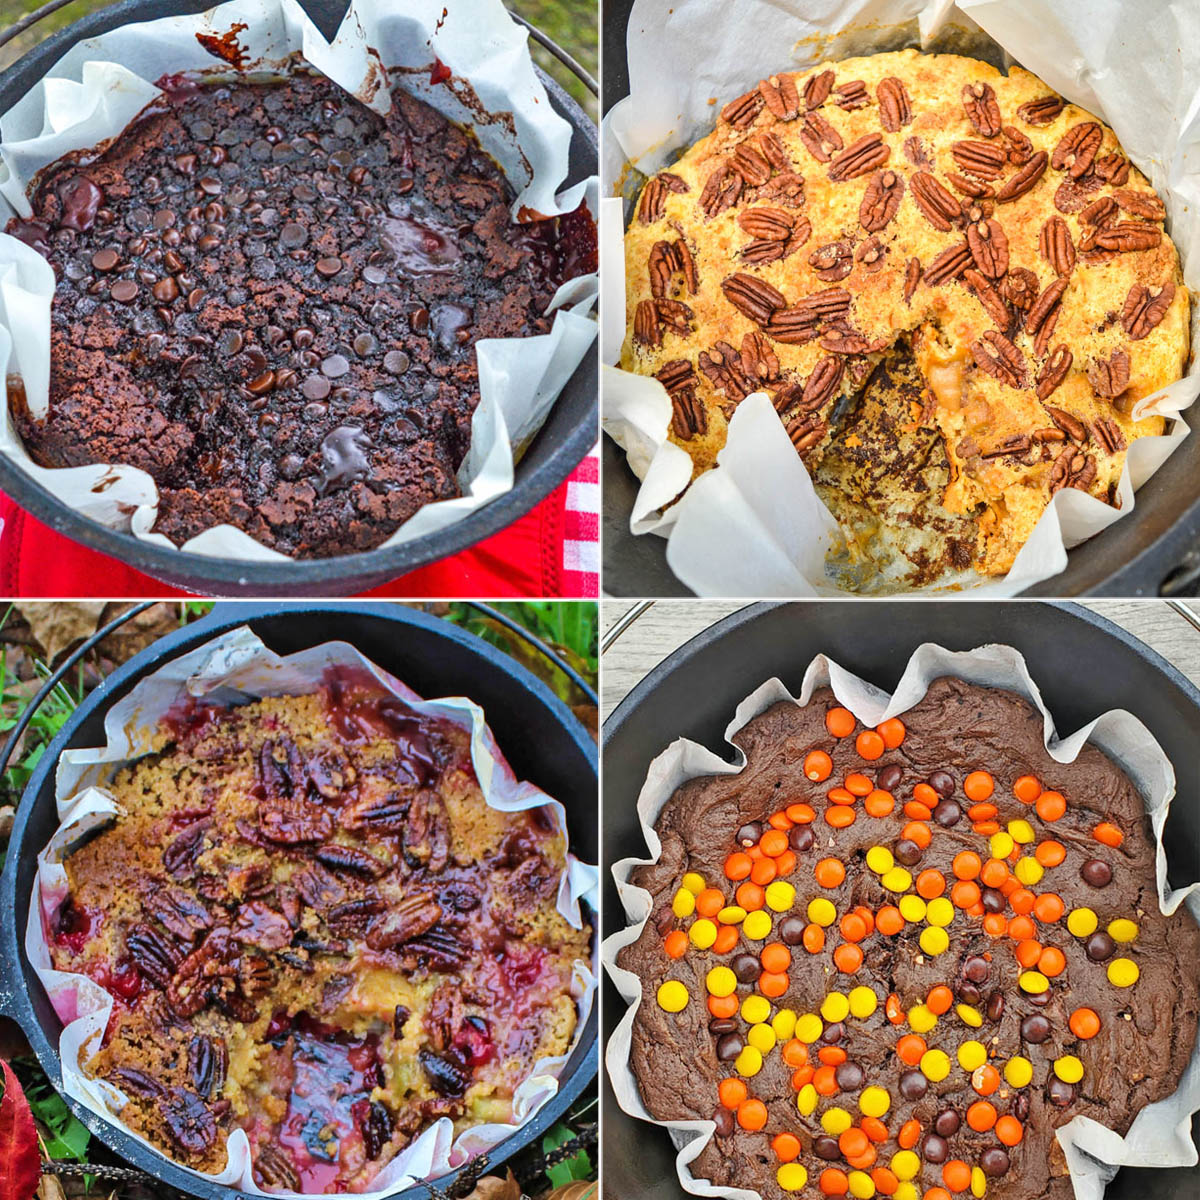 37 Dutch Oven Dessert Recipes for Camping Trips